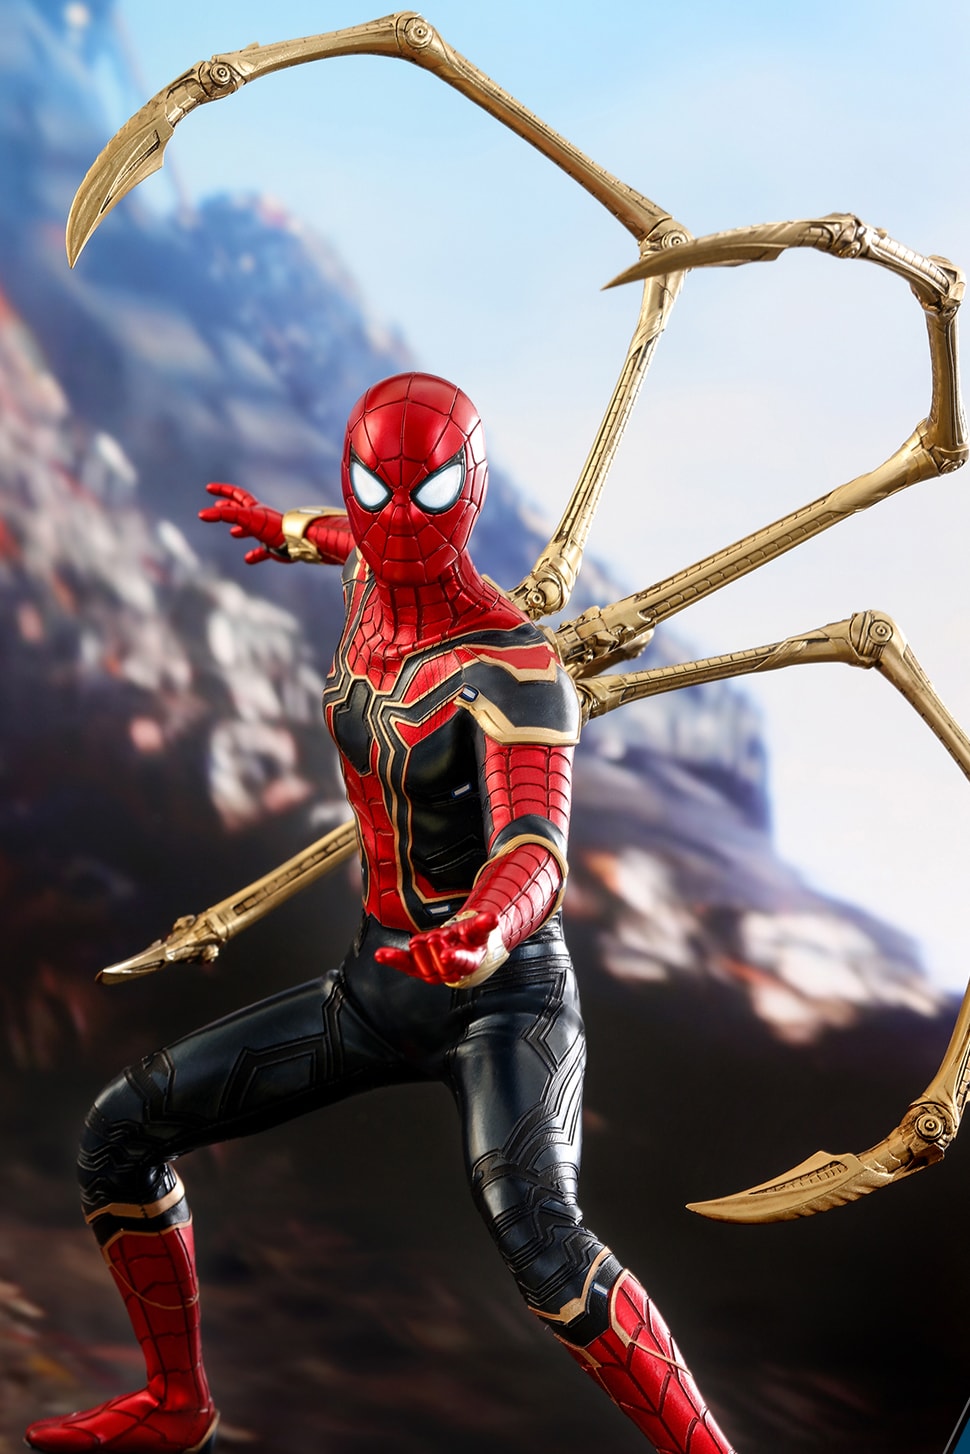 Avengers Infinity War Hot Toys Iron Spider Man Collectible Figure Tony Stark Tom Holland Marvel Action Comic